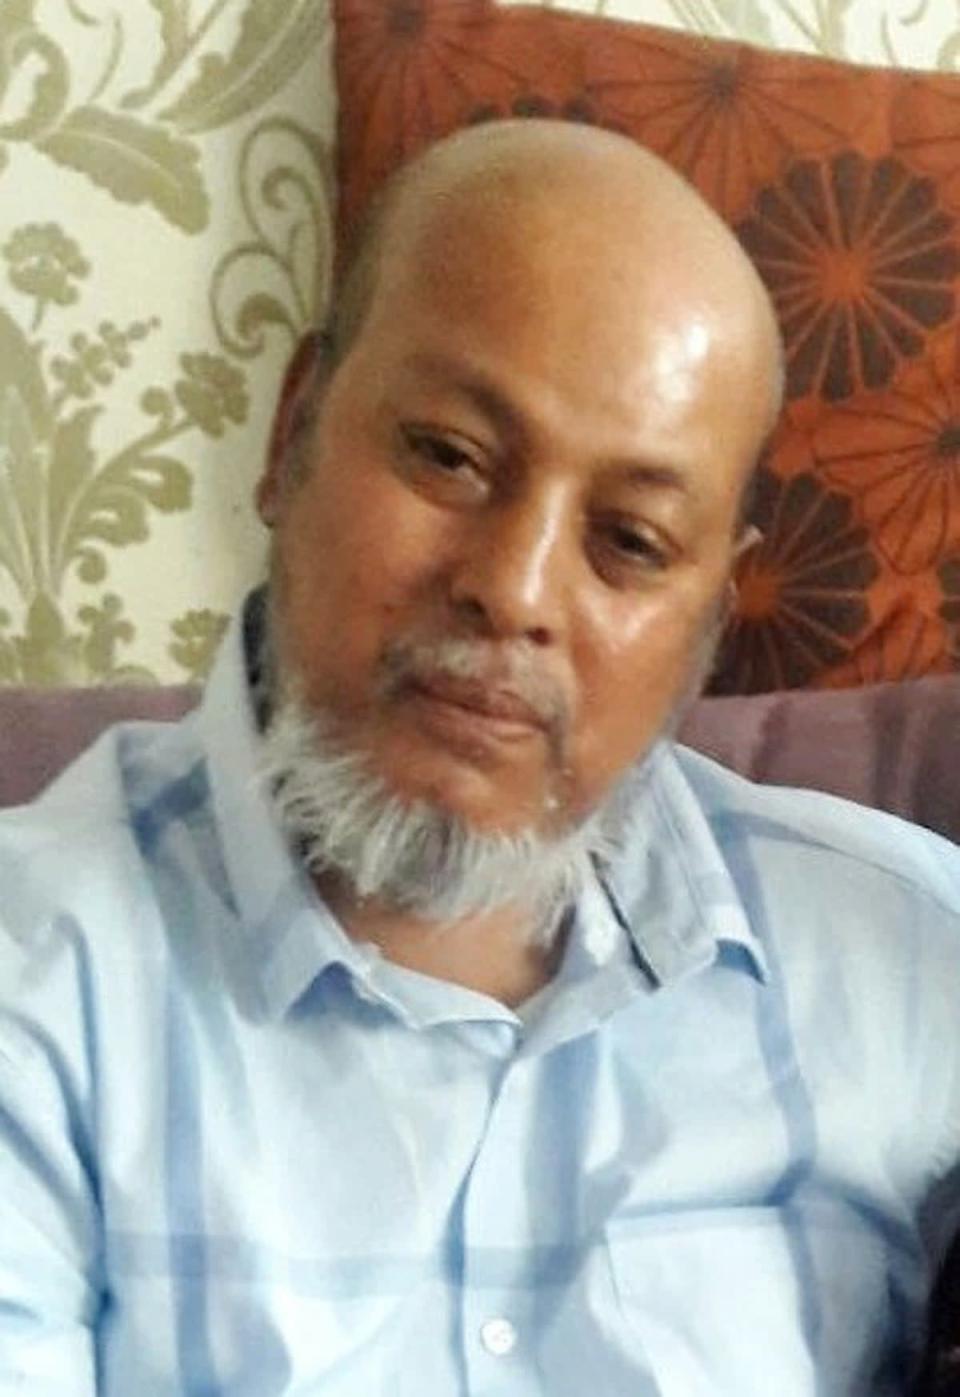 Makram Ali, 51, who died as a result of multiple injuries following a terror attack in Finsbury Park on June 19 2017 (Metropolitan Police/PA) (PA Media)